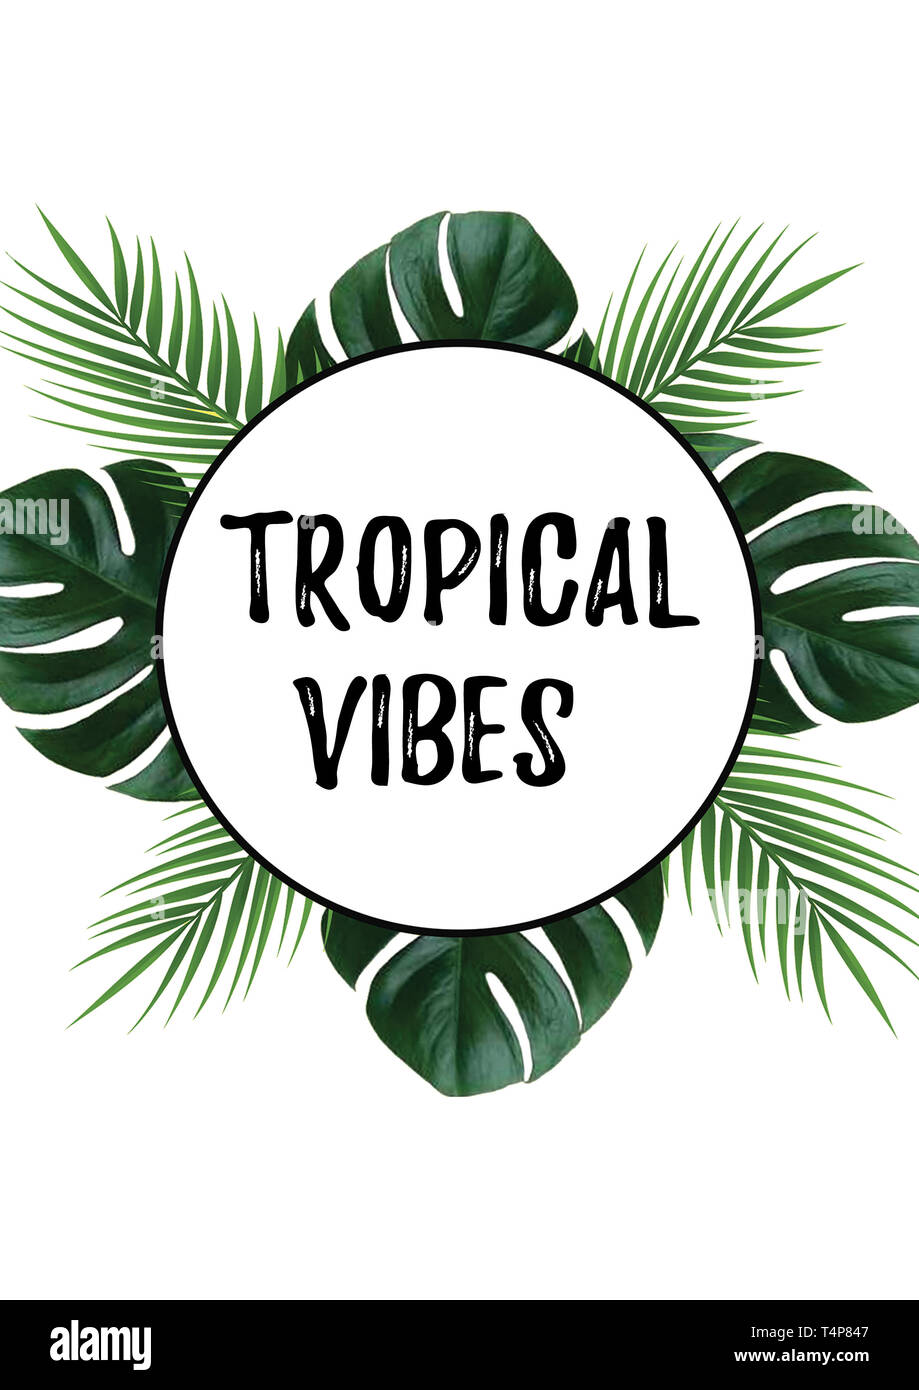 Tropical vibes with monstera plants border. Vacation quotes. Beach holidays. Stock Photo